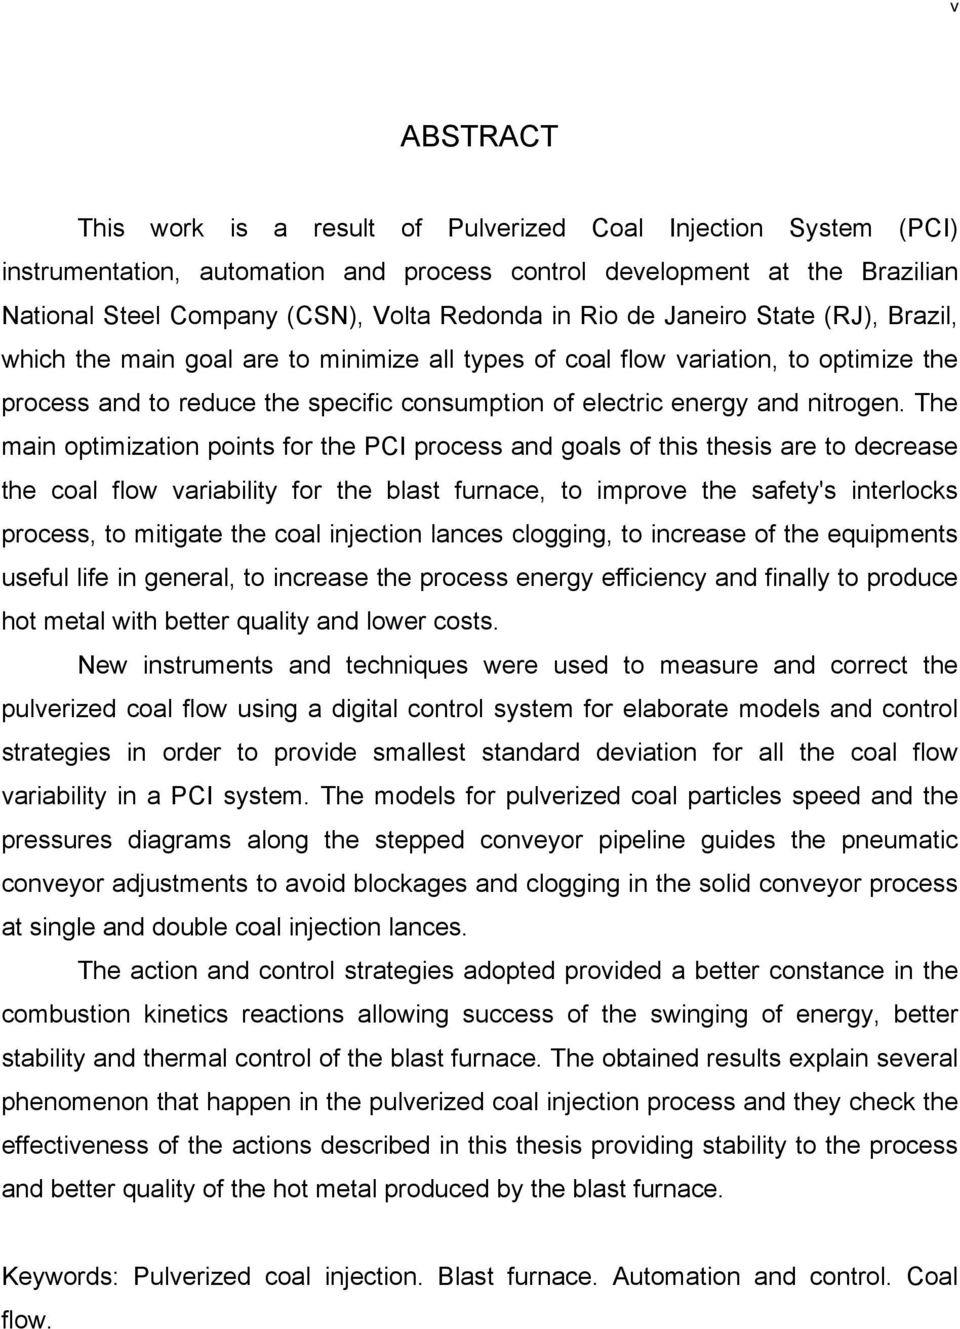 The main optimization points for the PCI process and goals of this thesis are to decrease the coal flow variability for the blast furnace, to improve the safety's interlocks process, to mitigate the